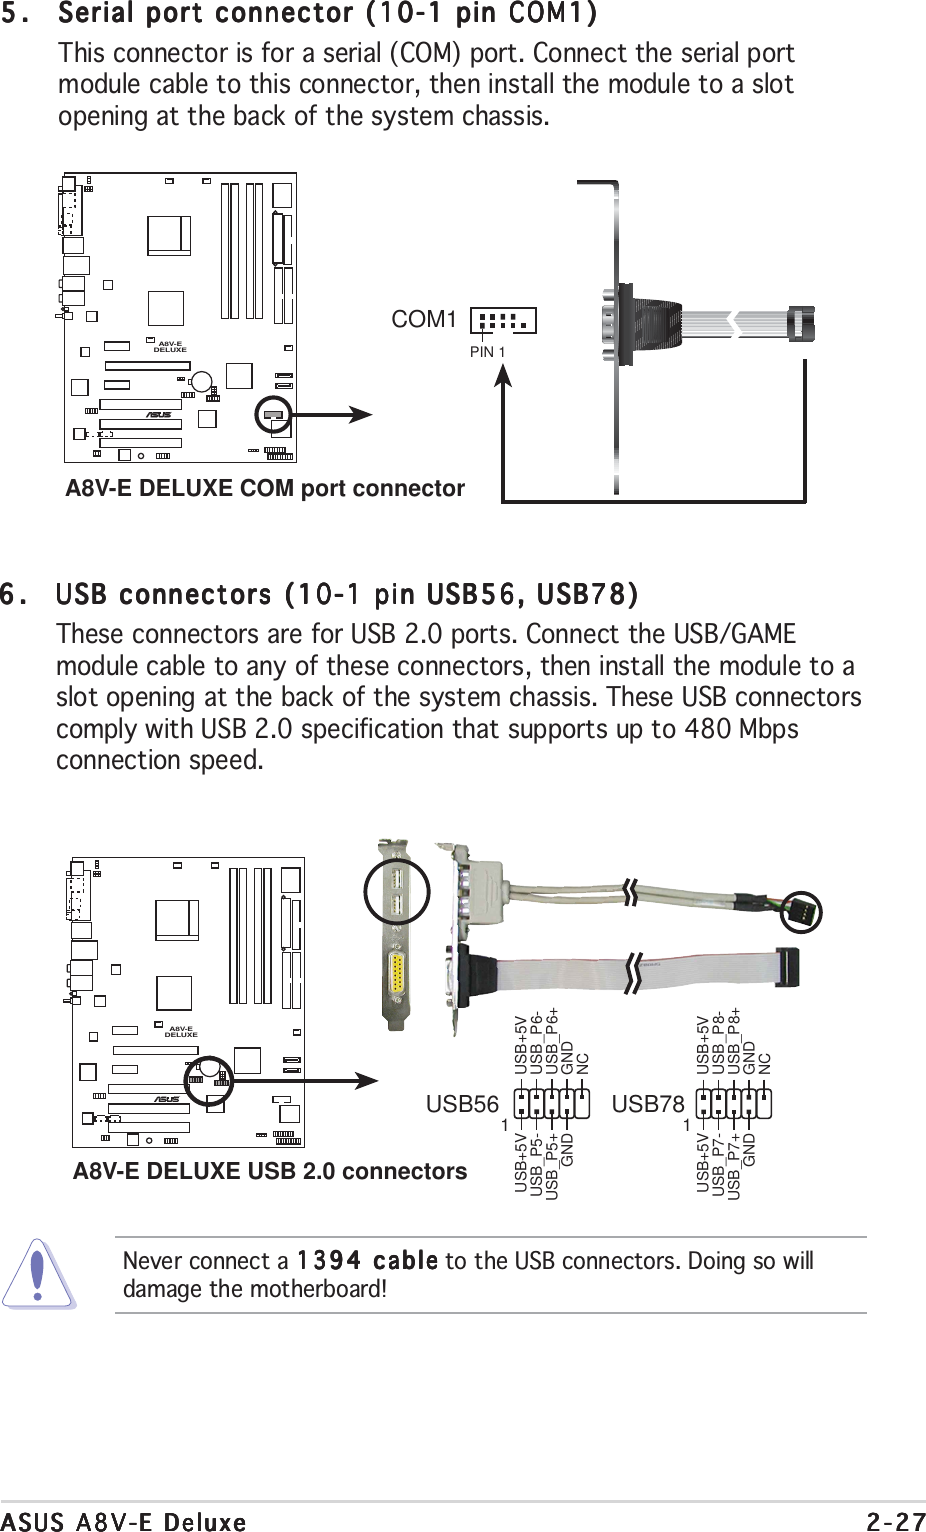 ASUS A8V-E DeluxeASUS A8V-E DeluxeASUS A8V-E DeluxeASUS A8V-E DeluxeASUS A8V-E Deluxe 2-272-272-272-272-275.5.5.5.5. Serial port connector (10-1 pin COM1)Serial port connector (10-1 pin COM1)Serial port connector (10-1 pin COM1)Serial port connector (10-1 pin COM1)Serial port connector (10-1 pin COM1)This connector is for a serial (COM) port. Connect the serial portmodule cable to this connector, then install the module to a slotopening at the back of the system chassis.Never connect a 1394 cable1394 cable1394 cable1394 cable1394 cable to the USB connectors. Doing so willdamage the motherboard!6.6.6.6.6. USB connectors (10-1 pin USB56, USB78)USB connectors (10-1 pin USB56, USB78)USB connectors (10-1 pin USB56, USB78)USB connectors (10-1 pin USB56, USB78)USB connectors (10-1 pin USB56, USB78)These connectors are for USB 2.0 ports. Connect the USB/GAMEmodule cable to any of these connectors, then install the module to aslot opening at the back of the system chassis. These USB connectorscomply with USB 2.0 specification that supports up to 480 Mbpsconnection speed.A8V-EDELUXE®A8V-E DELUXE COM port connectorPIN 1COM1A8V-EDELUXE®A8V-E DELUXE USB 2.0 connectorsUSB56USB+5VUSB_P6-USB_P6+GNDNCUSB+5VUSB_P5-USB_P5+GND1USB78USB+5VUSB_P8-USB_P8+GNDNCUSB+5VUSB_P7-USB_P7+GND1